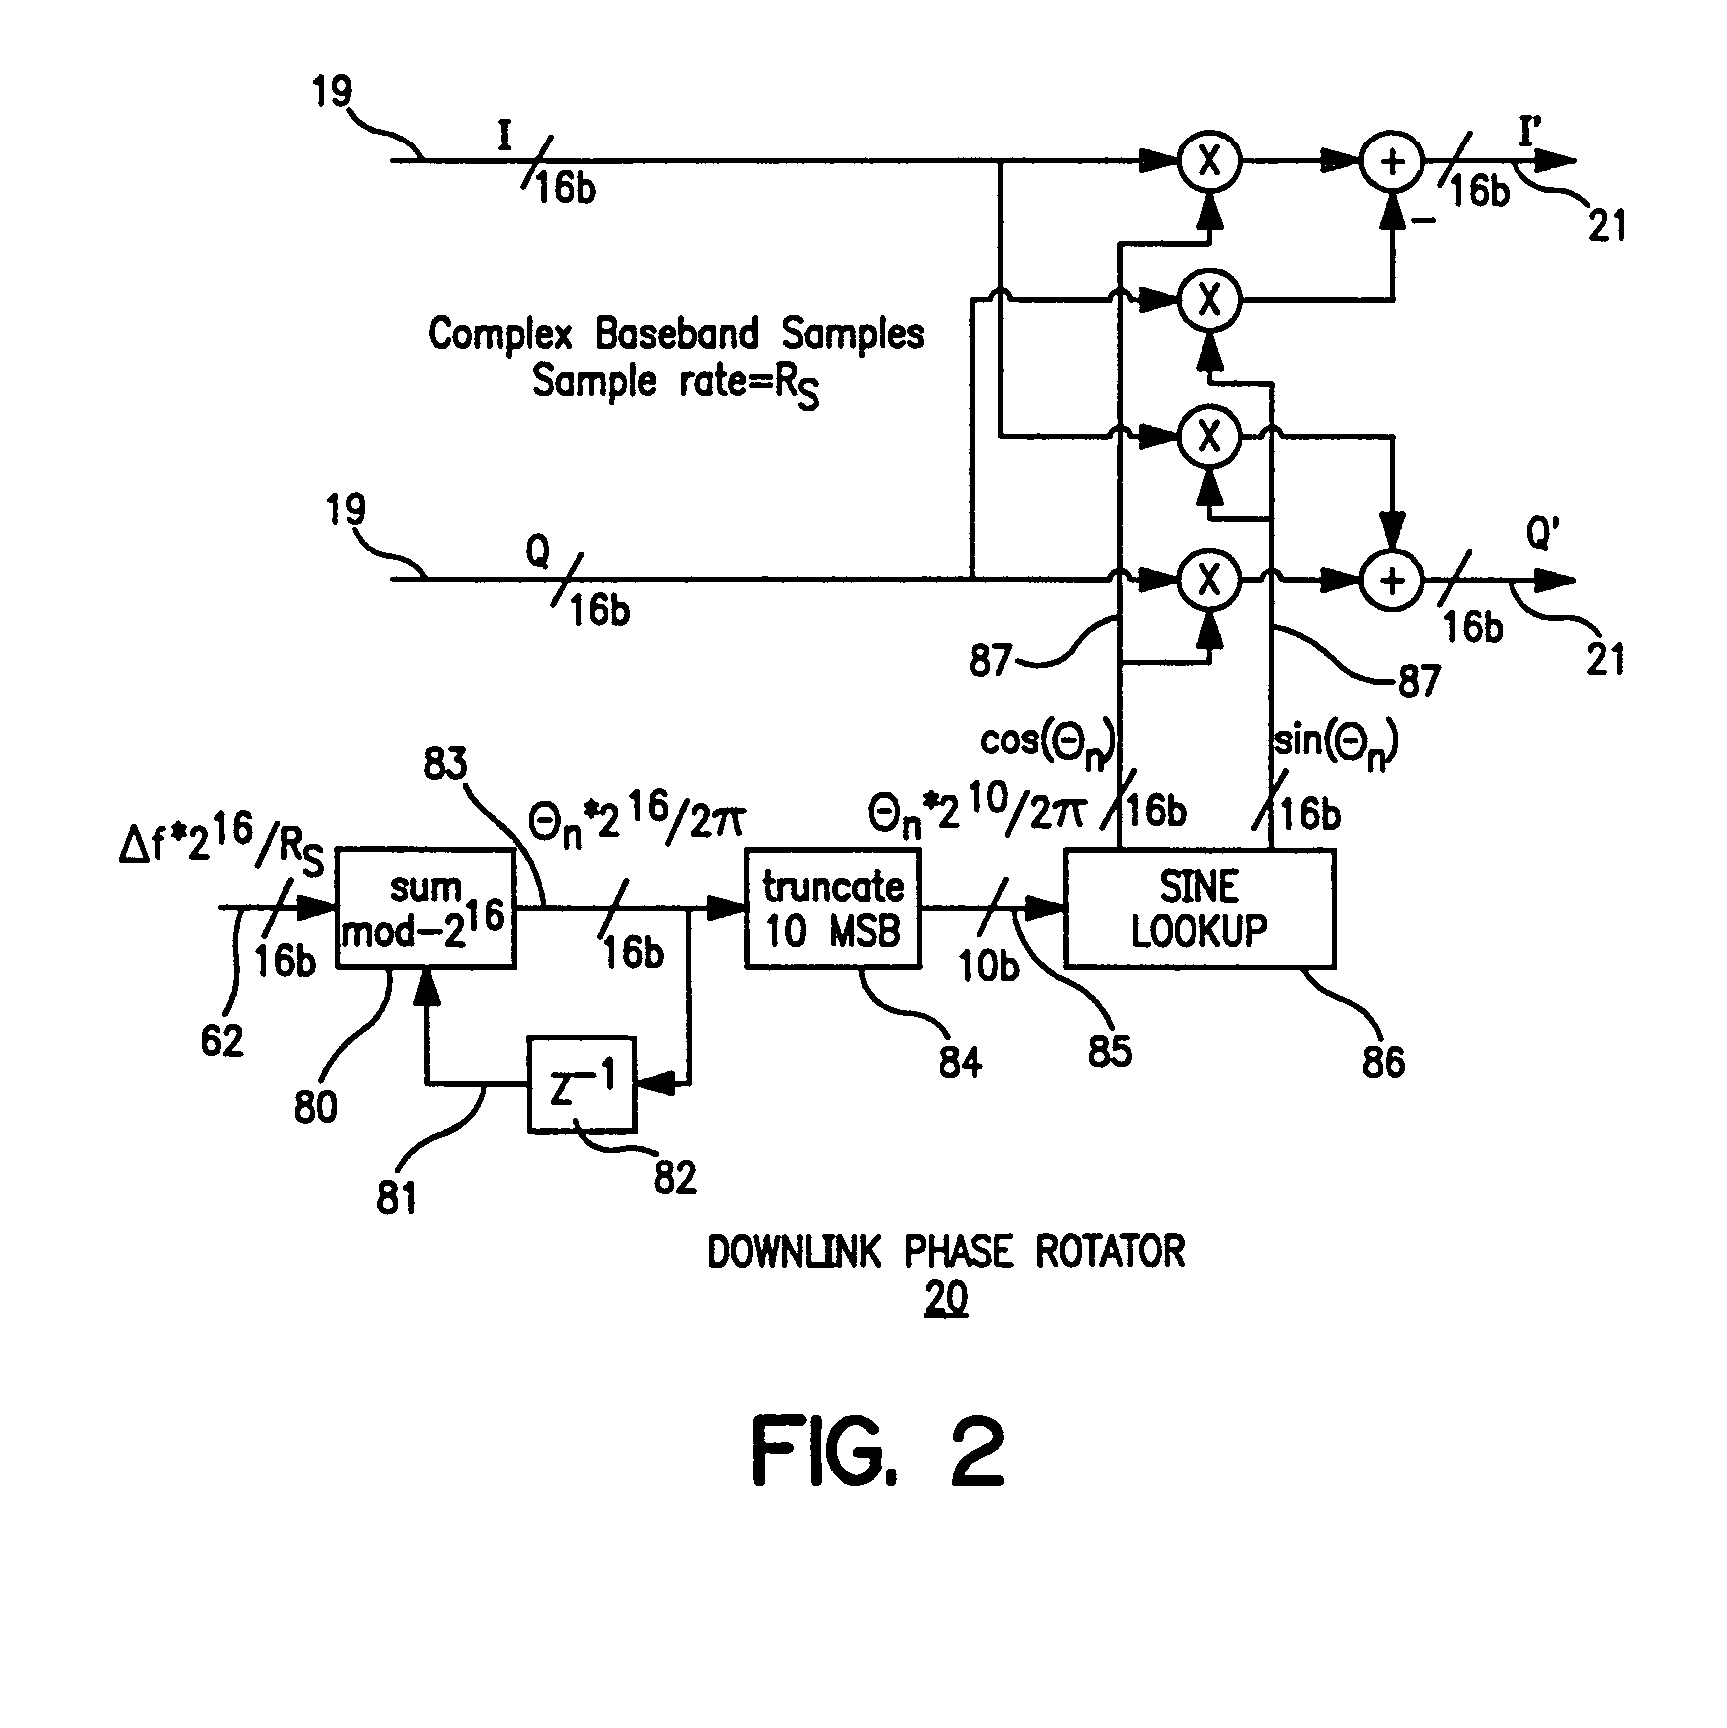 Radio frequency control for communication systems